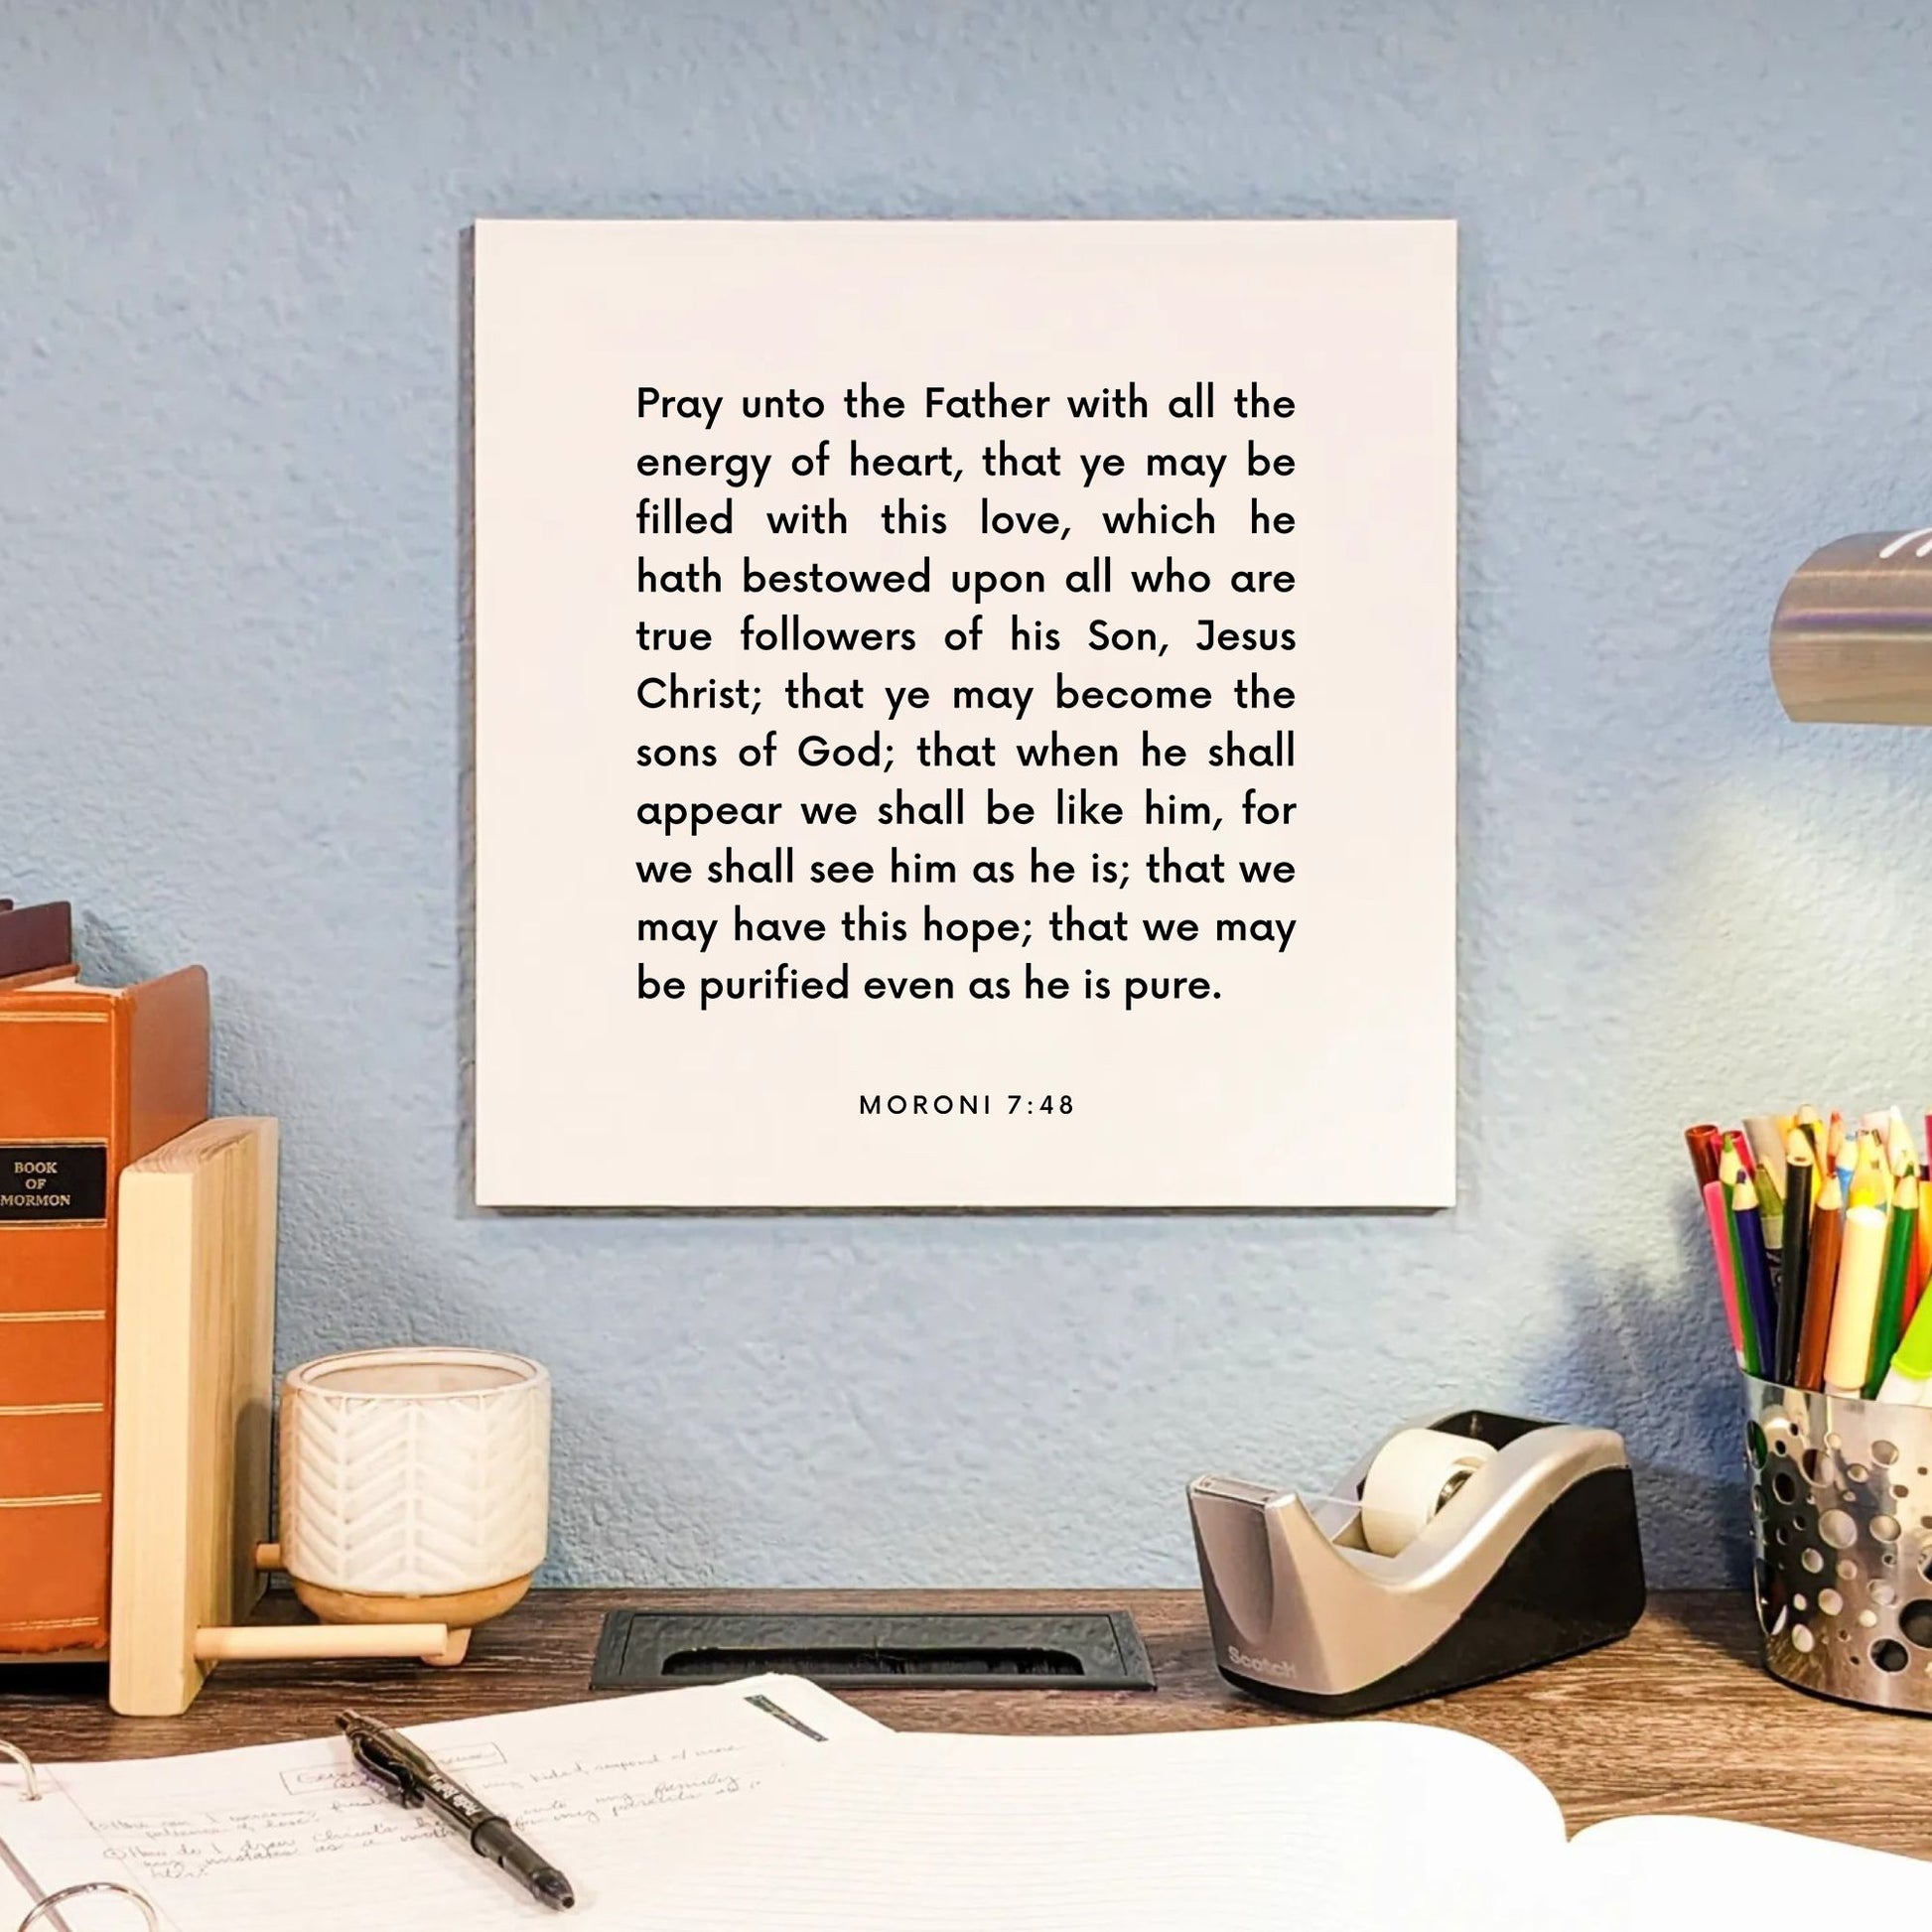 Desk mouting of the scripture tile for Moroni 7:48 - "Pray unto the Father with all the energy of heart"